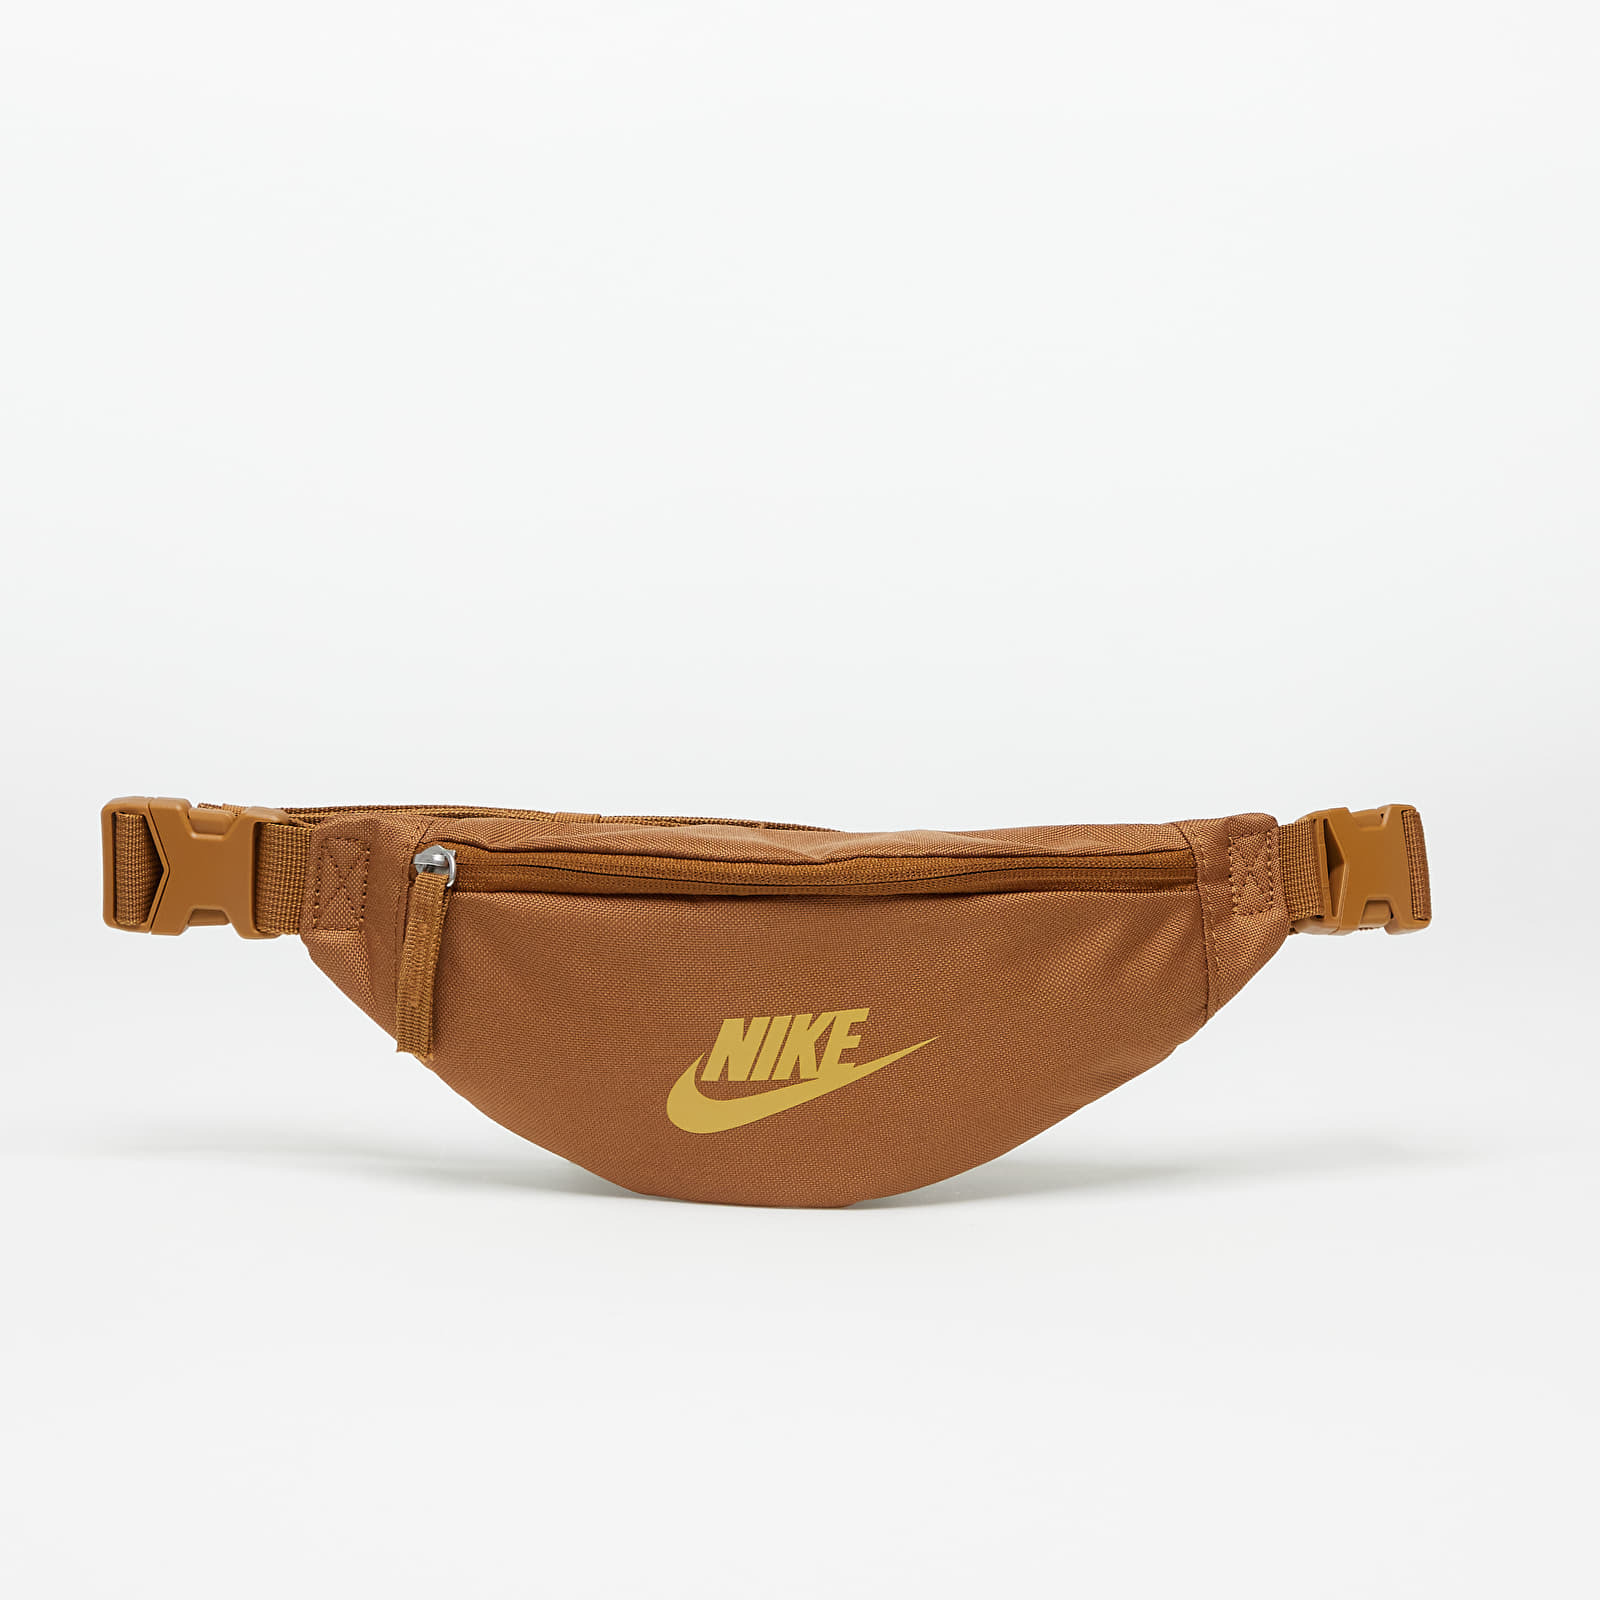 Nike - heritage waistpack ale brown/ ale brown/ wheat gold